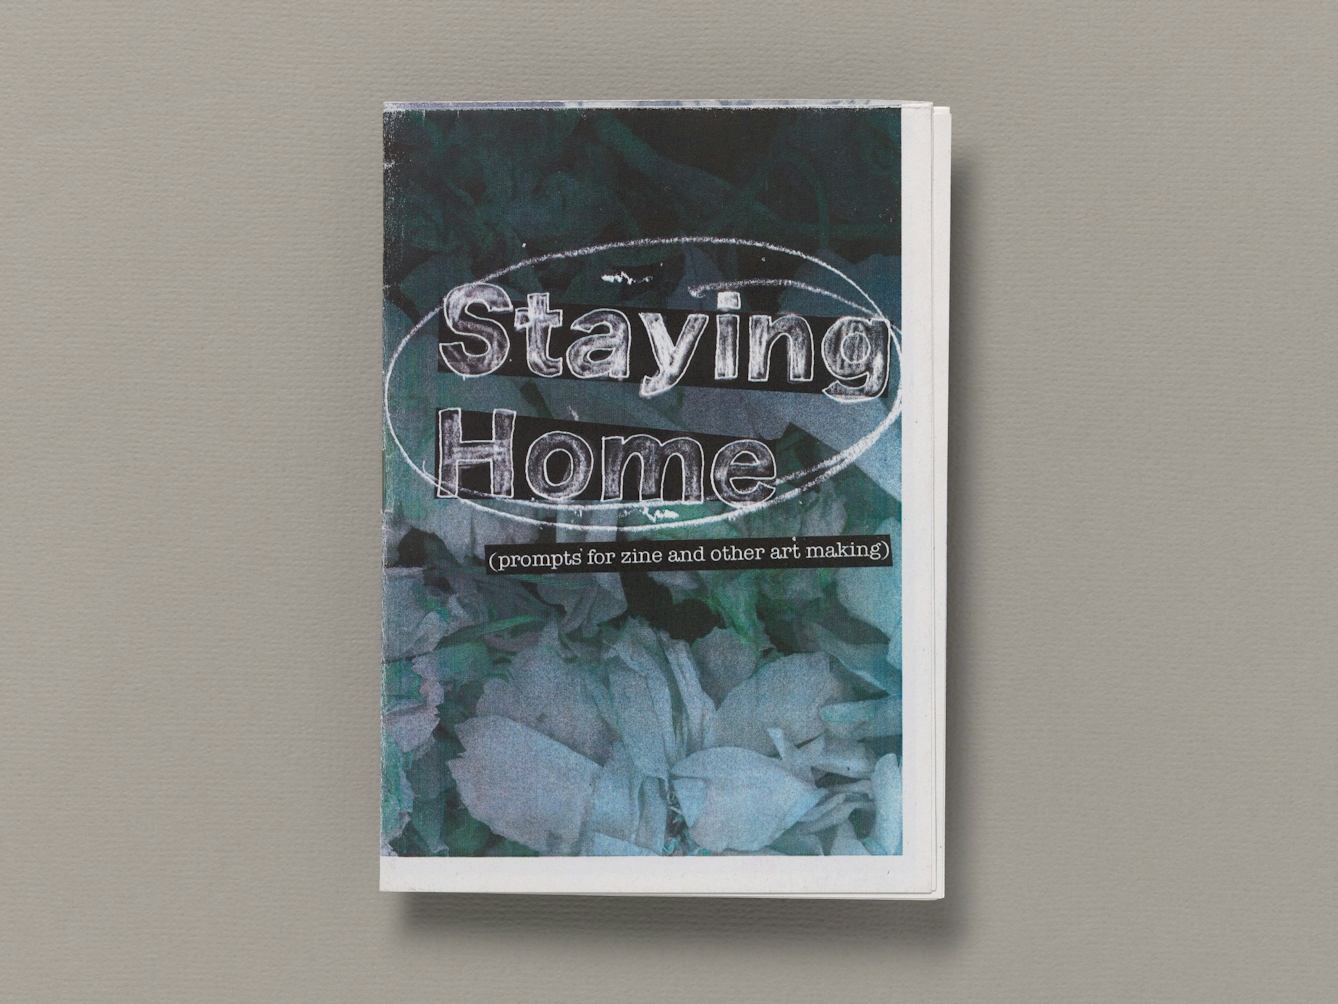 The front cover of the zine "Staying home (prompts for zine and other art making). by Vicky Stevenson. The words "Saying home are written in large outline  in the middle third of the cover and roughly filled in with a white chalky efet against a black background. The words are roughly circled in the same chalk like marker. Imediately below this is the subtitle in brackets in white typeset in a narrow black strip. The background of the whole page is an abstract pattern of pale white shapes tinged with bluish green against a black background.